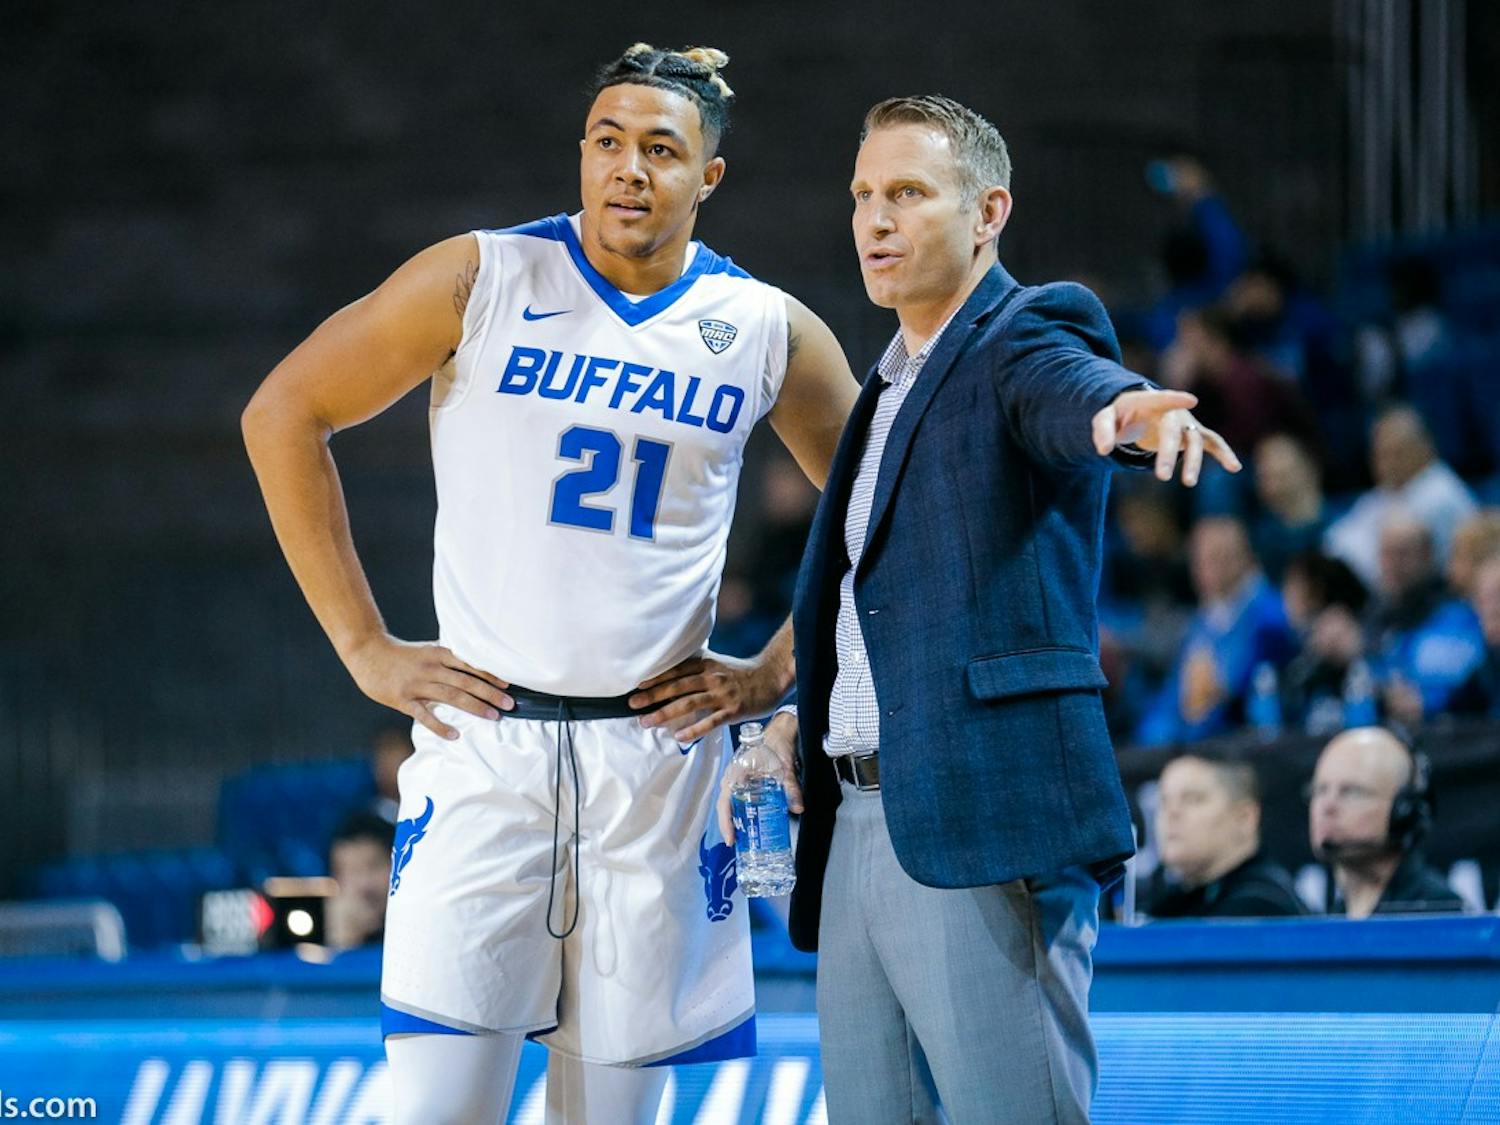 Dominic Johnson (left) and Nate Oats (right) developed a strong bond at UB.&nbsp;